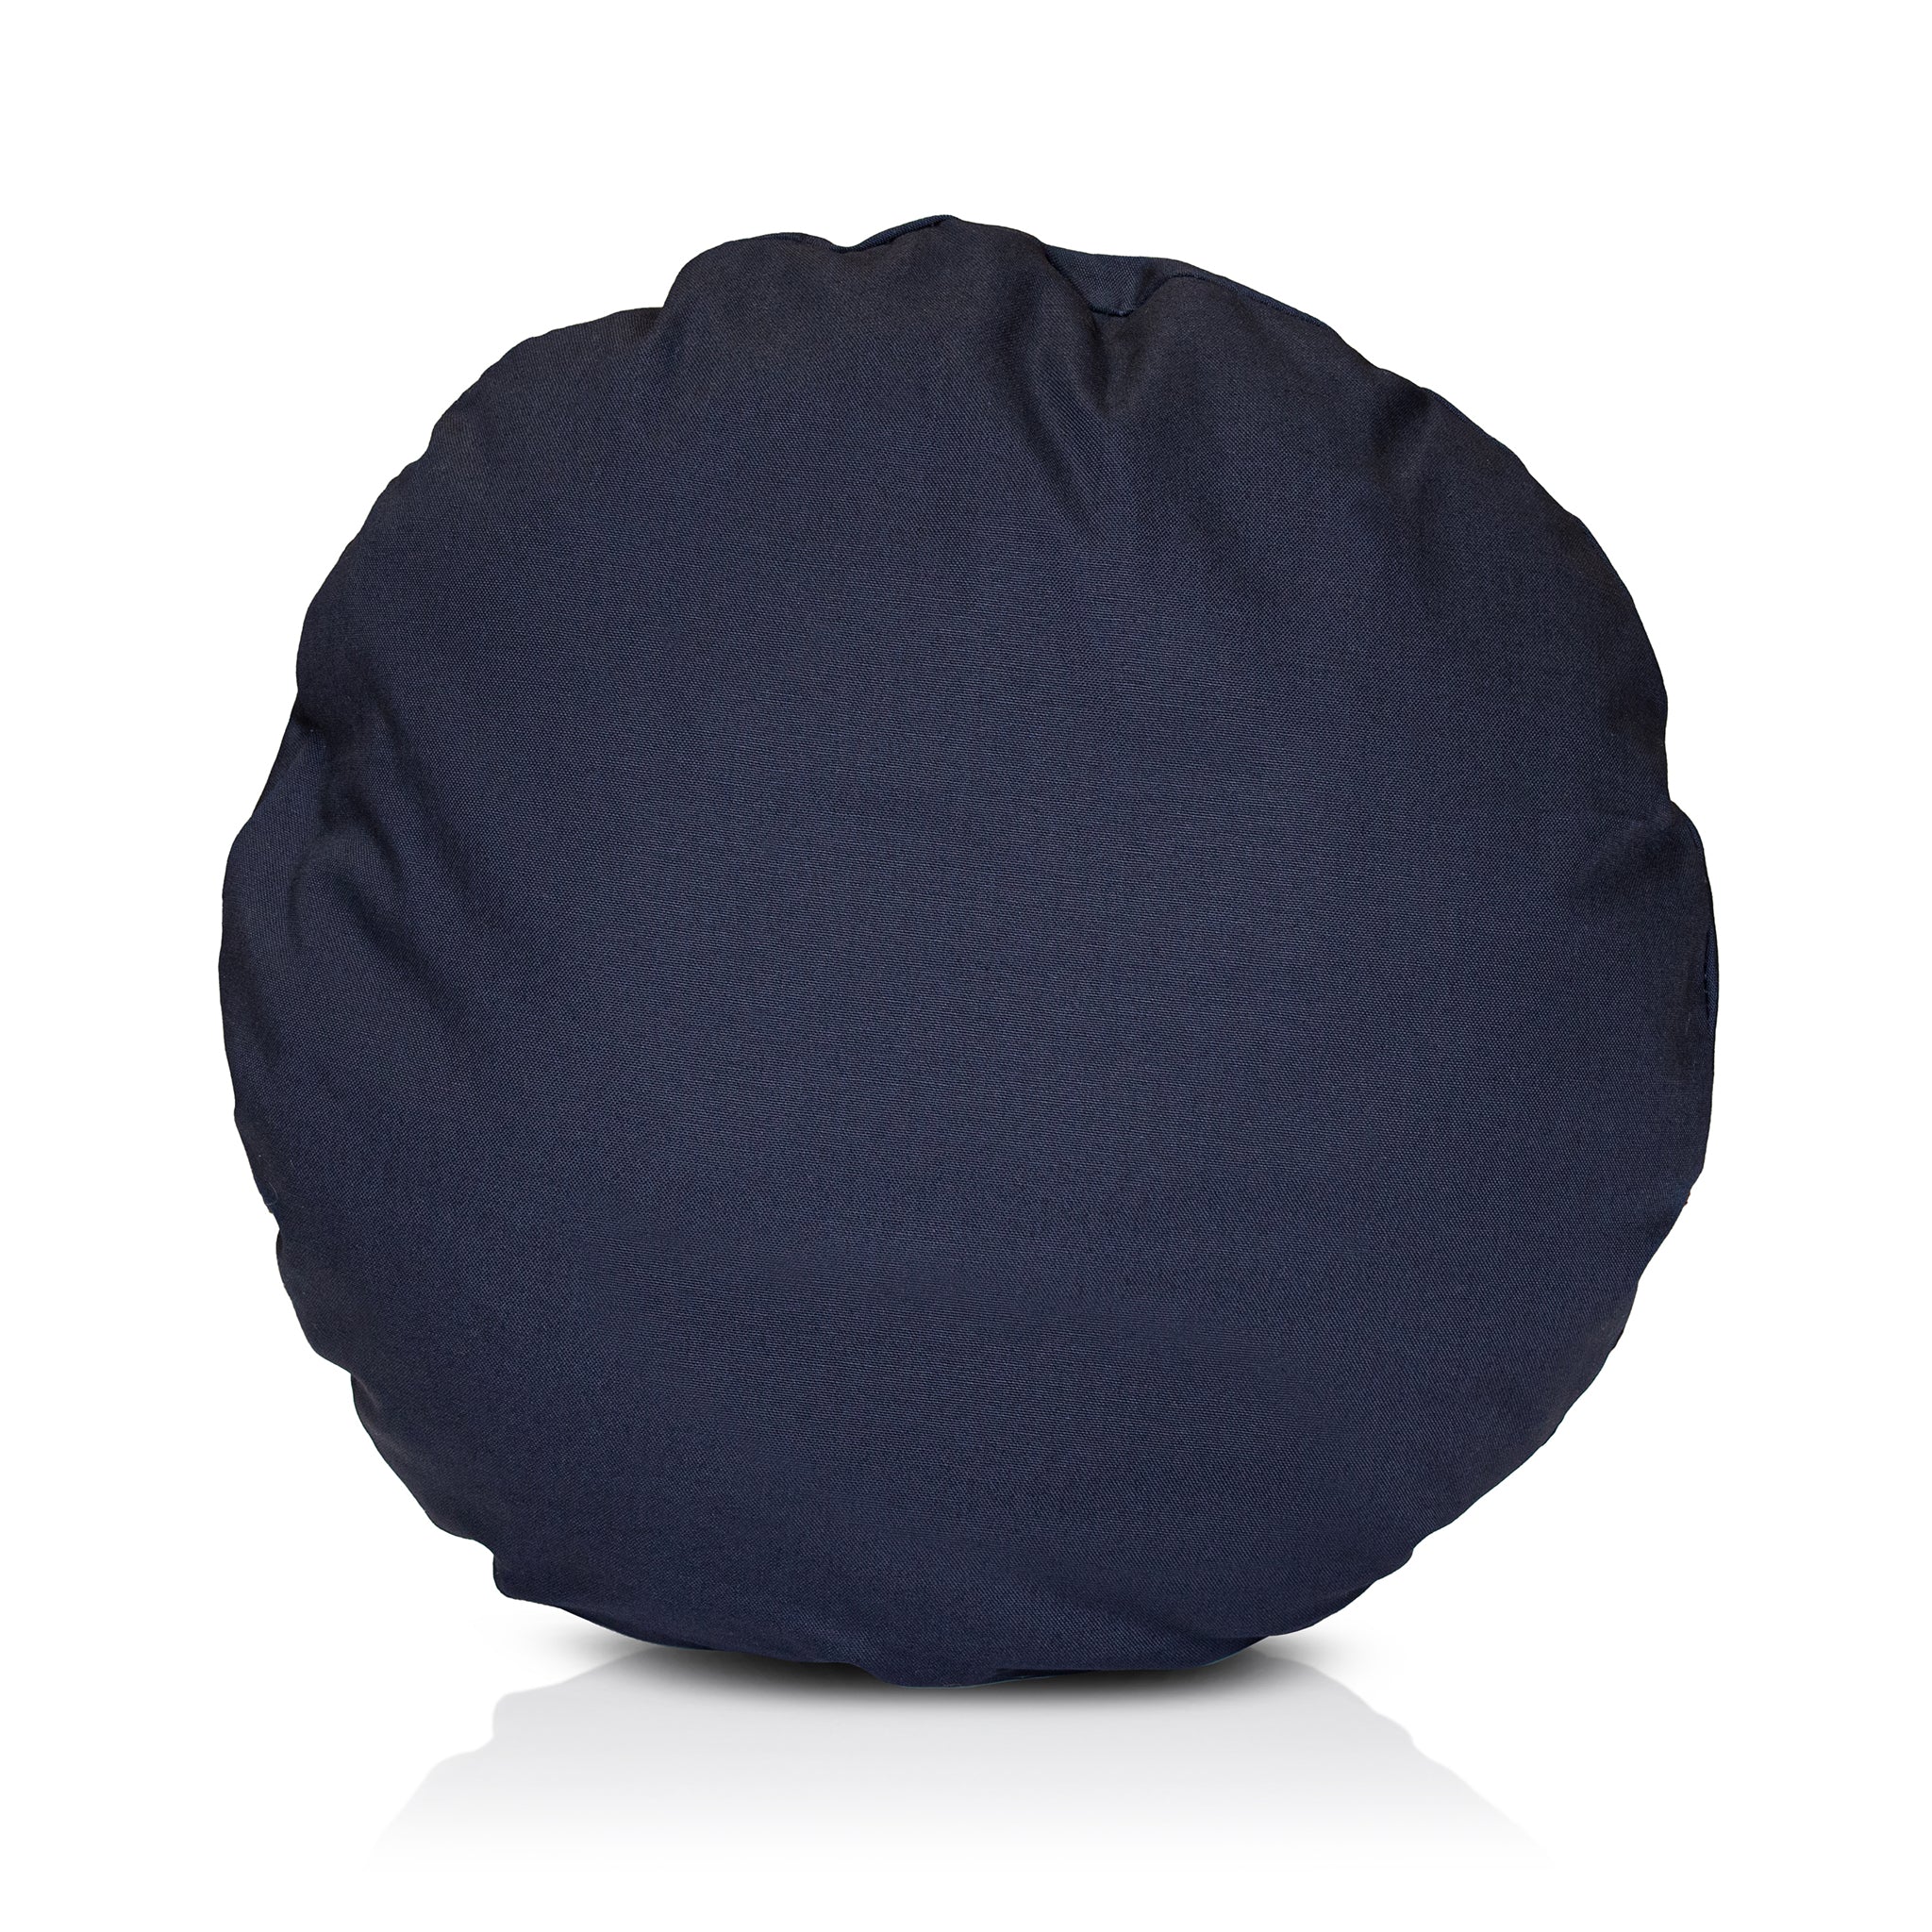 A chimney sheep PetSnug wool filled cushion. The wool cushion sits upon a white background. This is a large blue cushion.